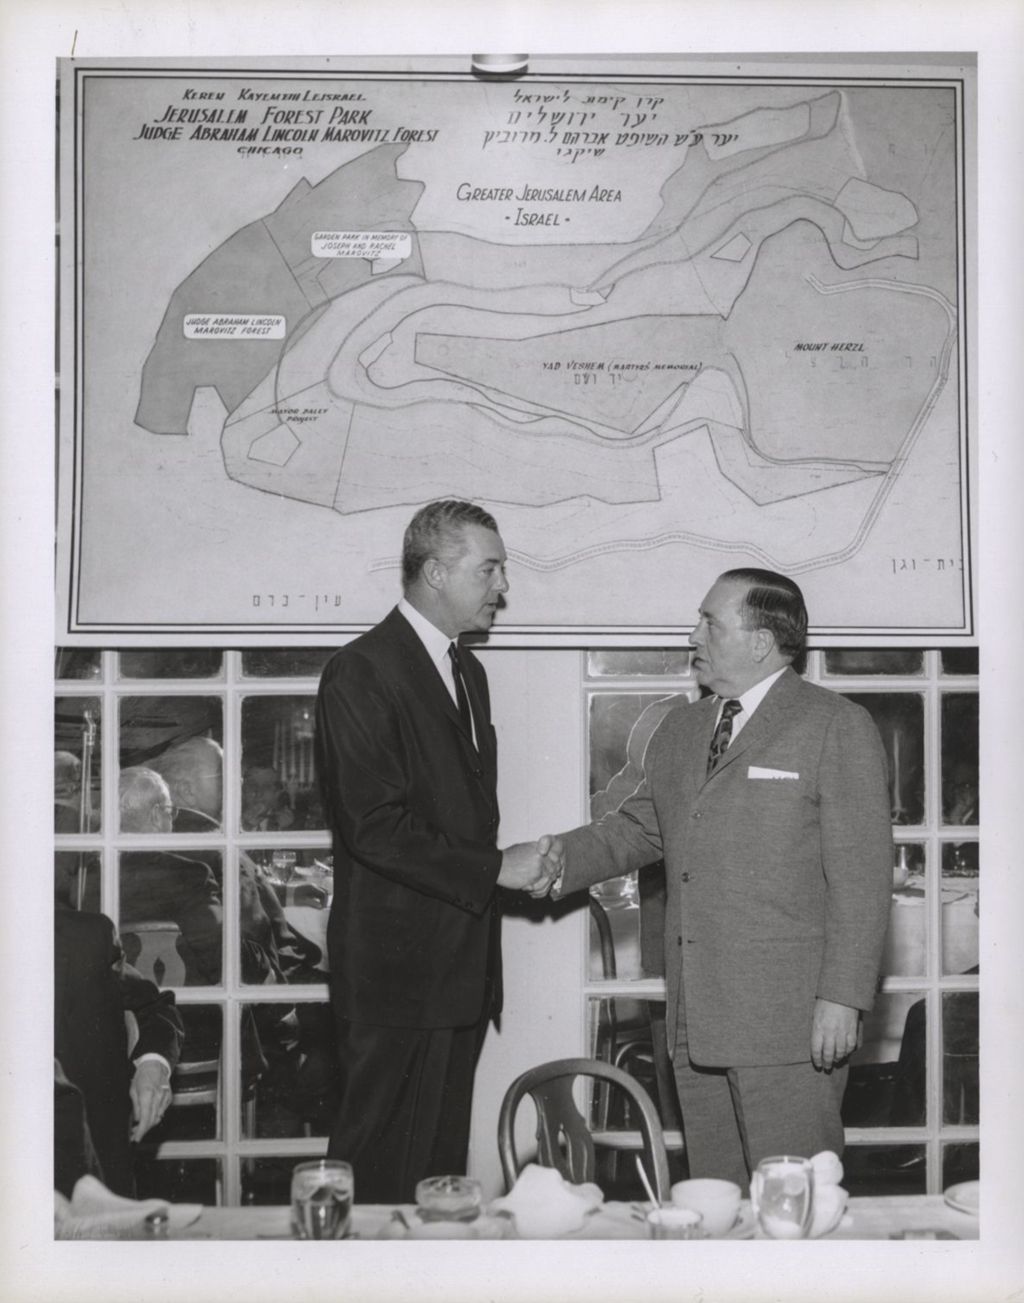 Miniature of Richard J. Daley and a man with Jerusalem map showing Judge Marovitz Forest